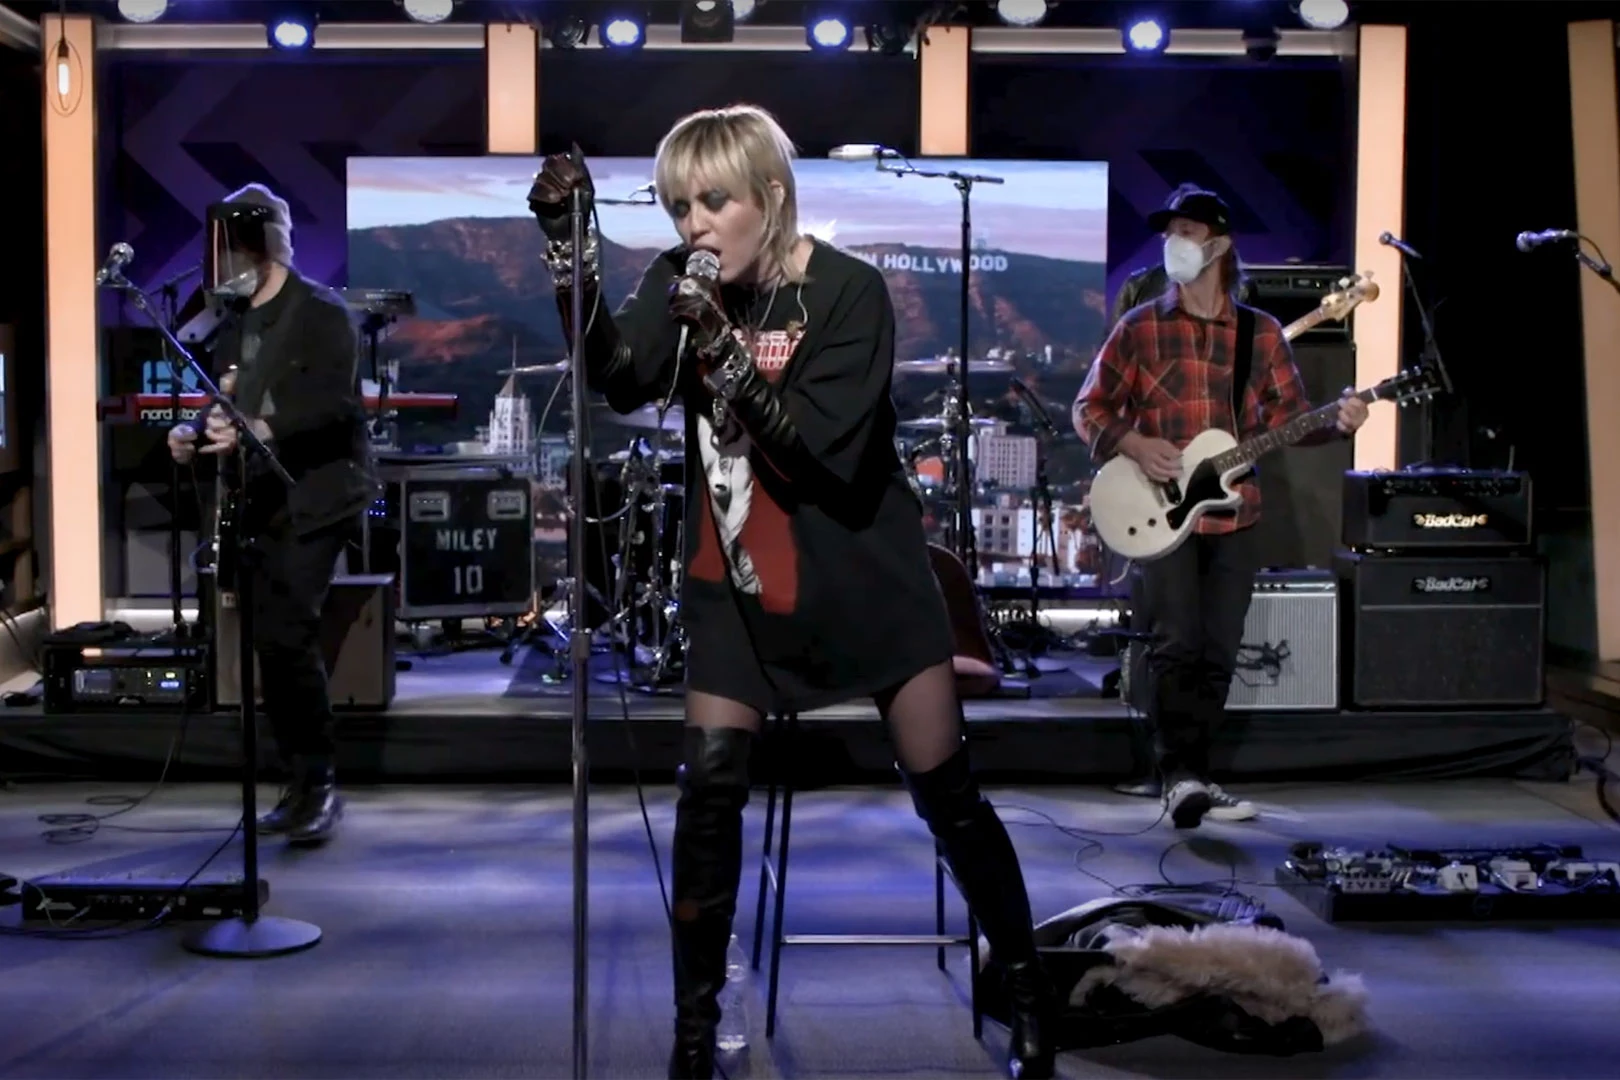 Miley Cyrus Covers Hole's 'Doll Parts' on 'Howard Stern Show'